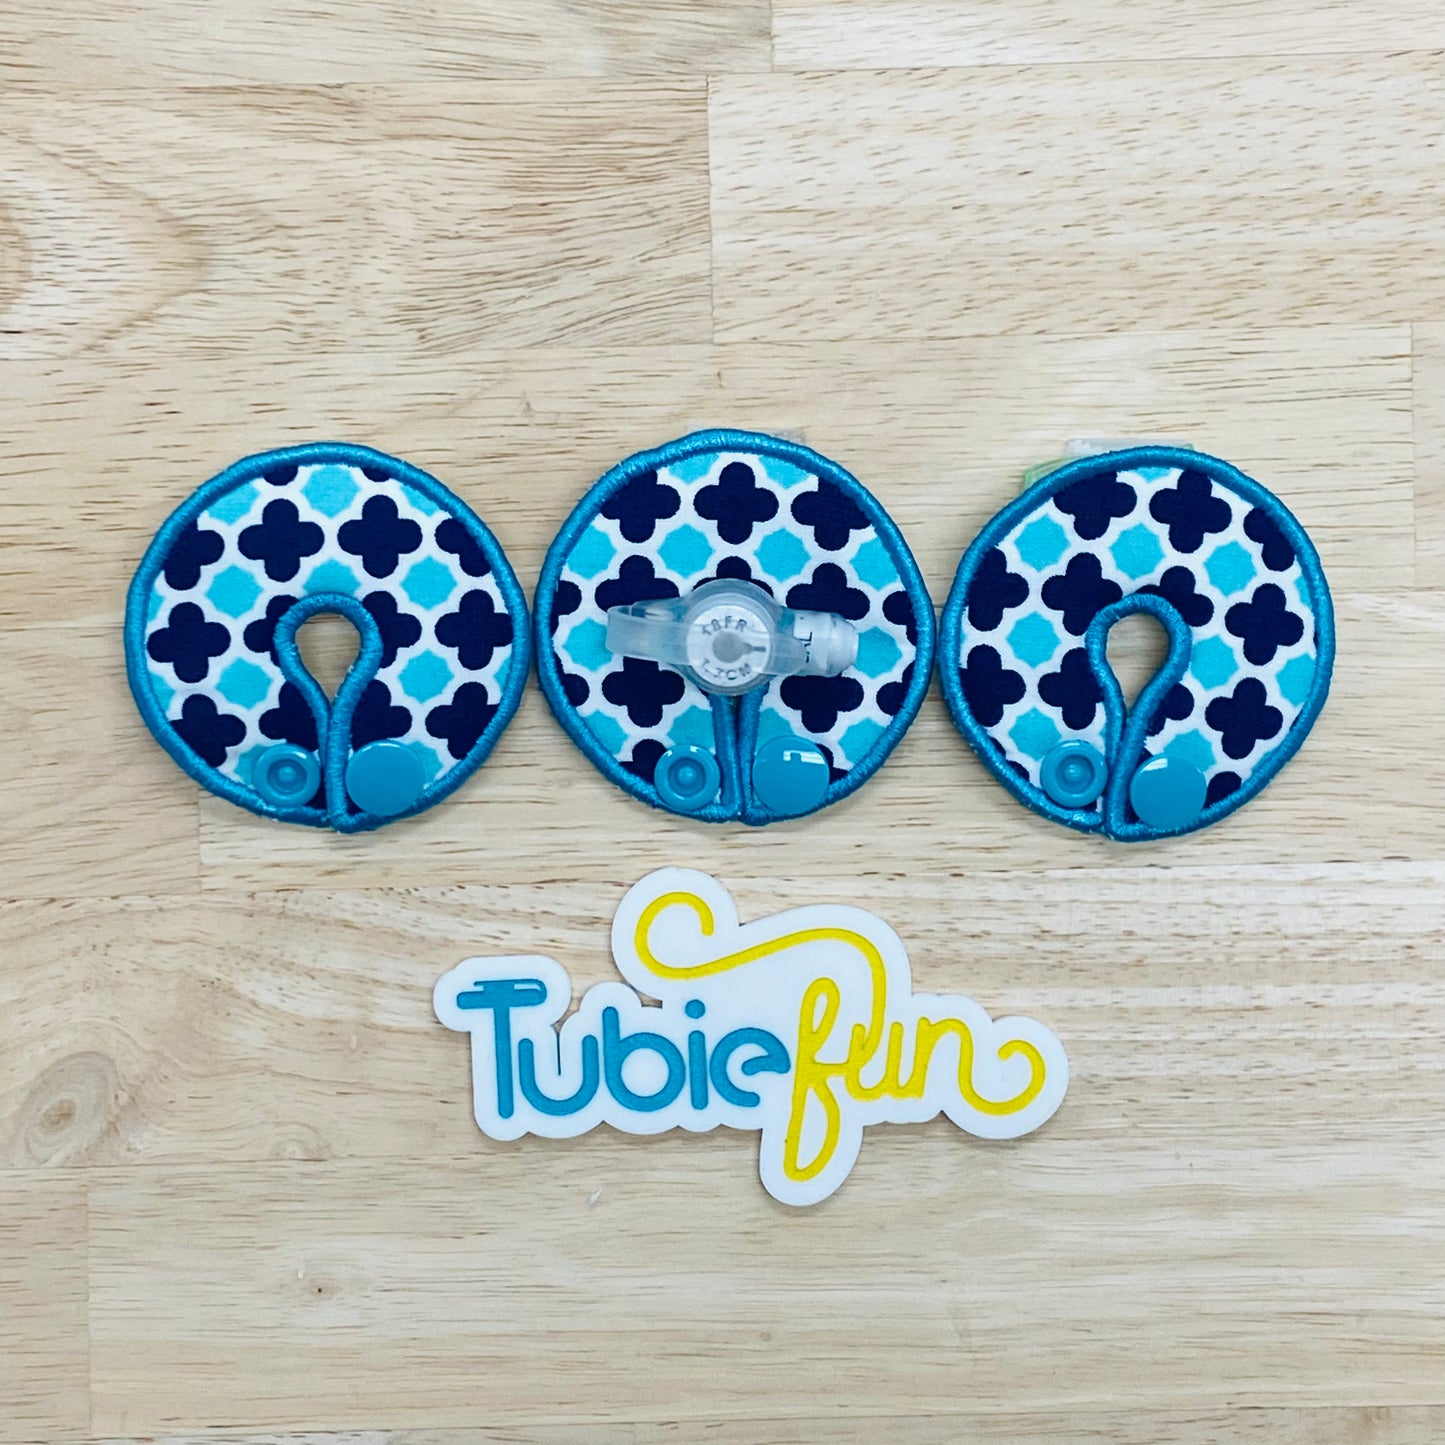 G-Tube Button Pad Cover - Blue and Teal Pattern